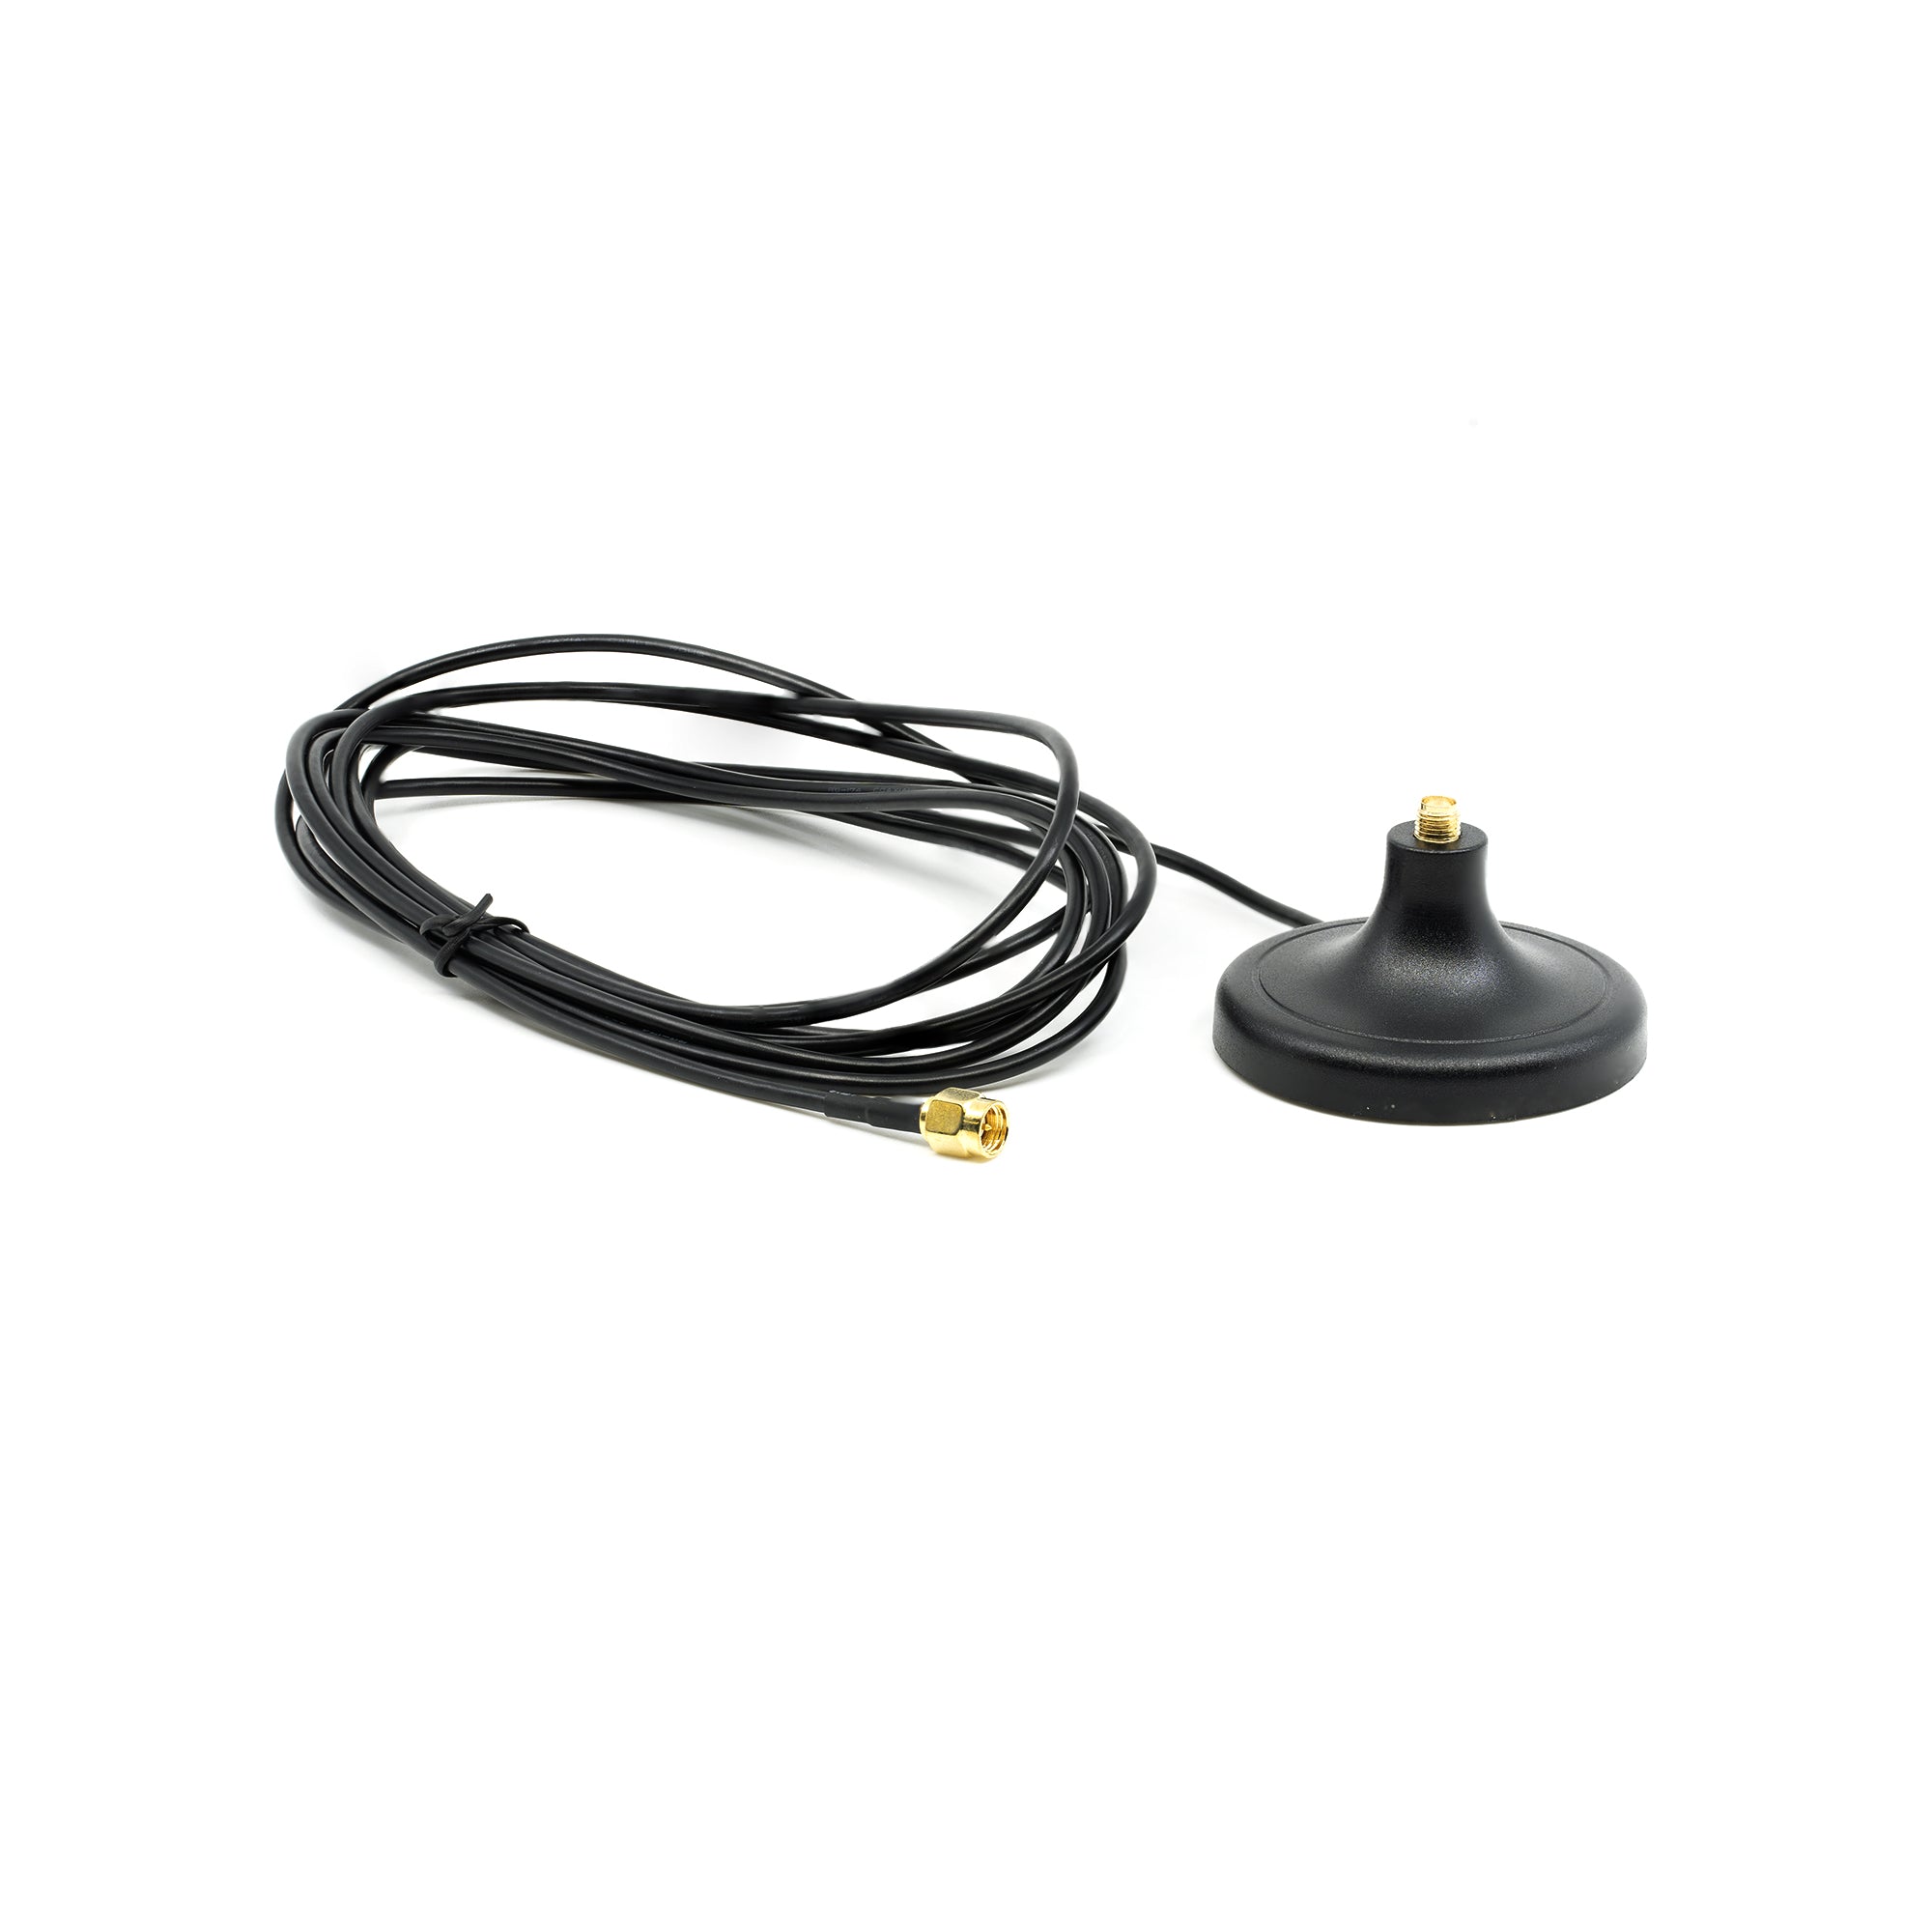 TBS SMA Extender with Magnetic Base (3M)